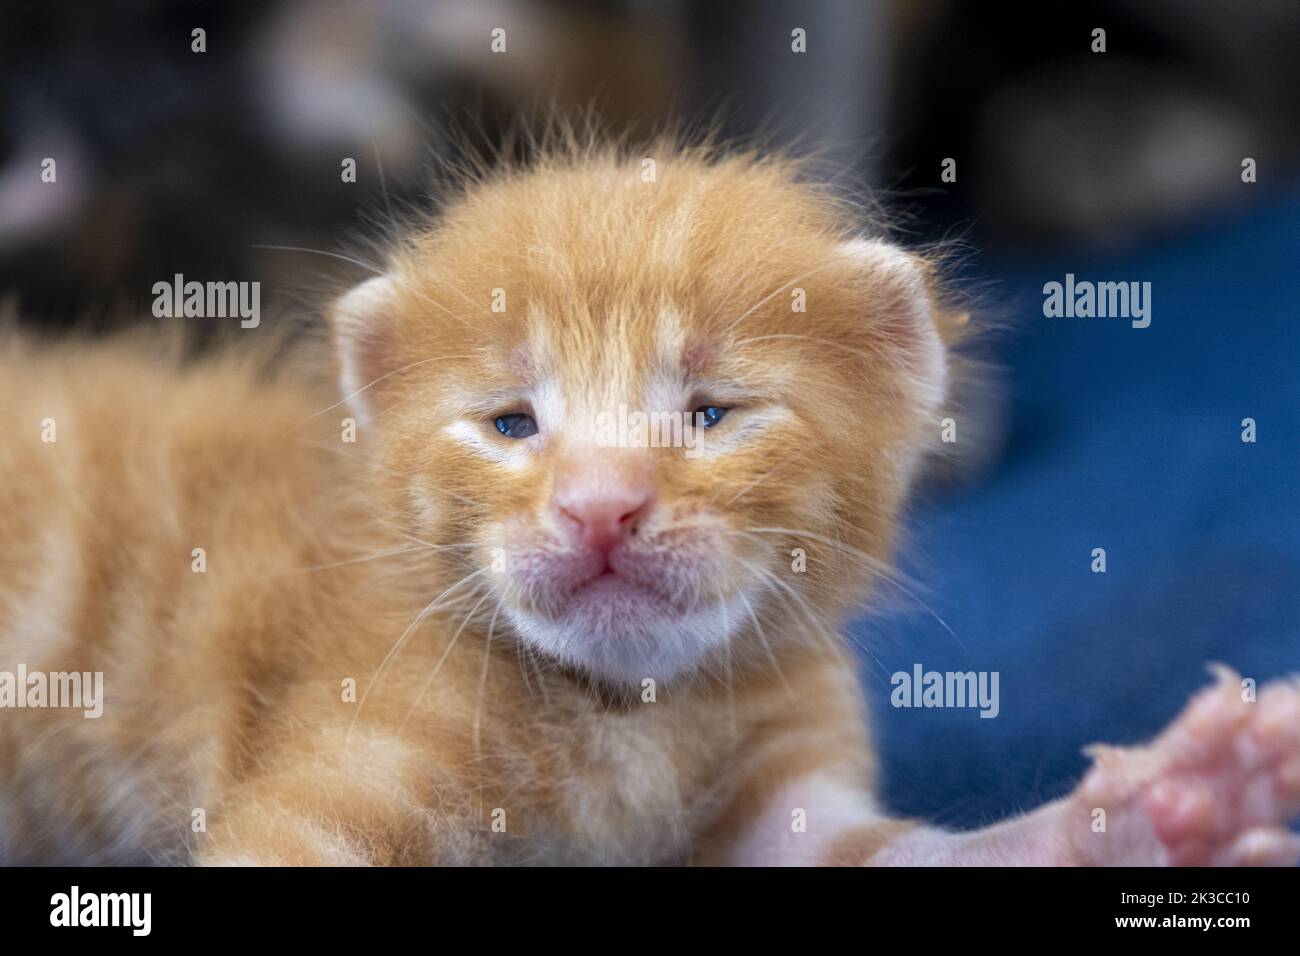 Newborn orange tabby cat stretching, kitten concept, half-open eyes newborn cat is laying down, cute small kitten concept, funny red baby cat Stock Photo